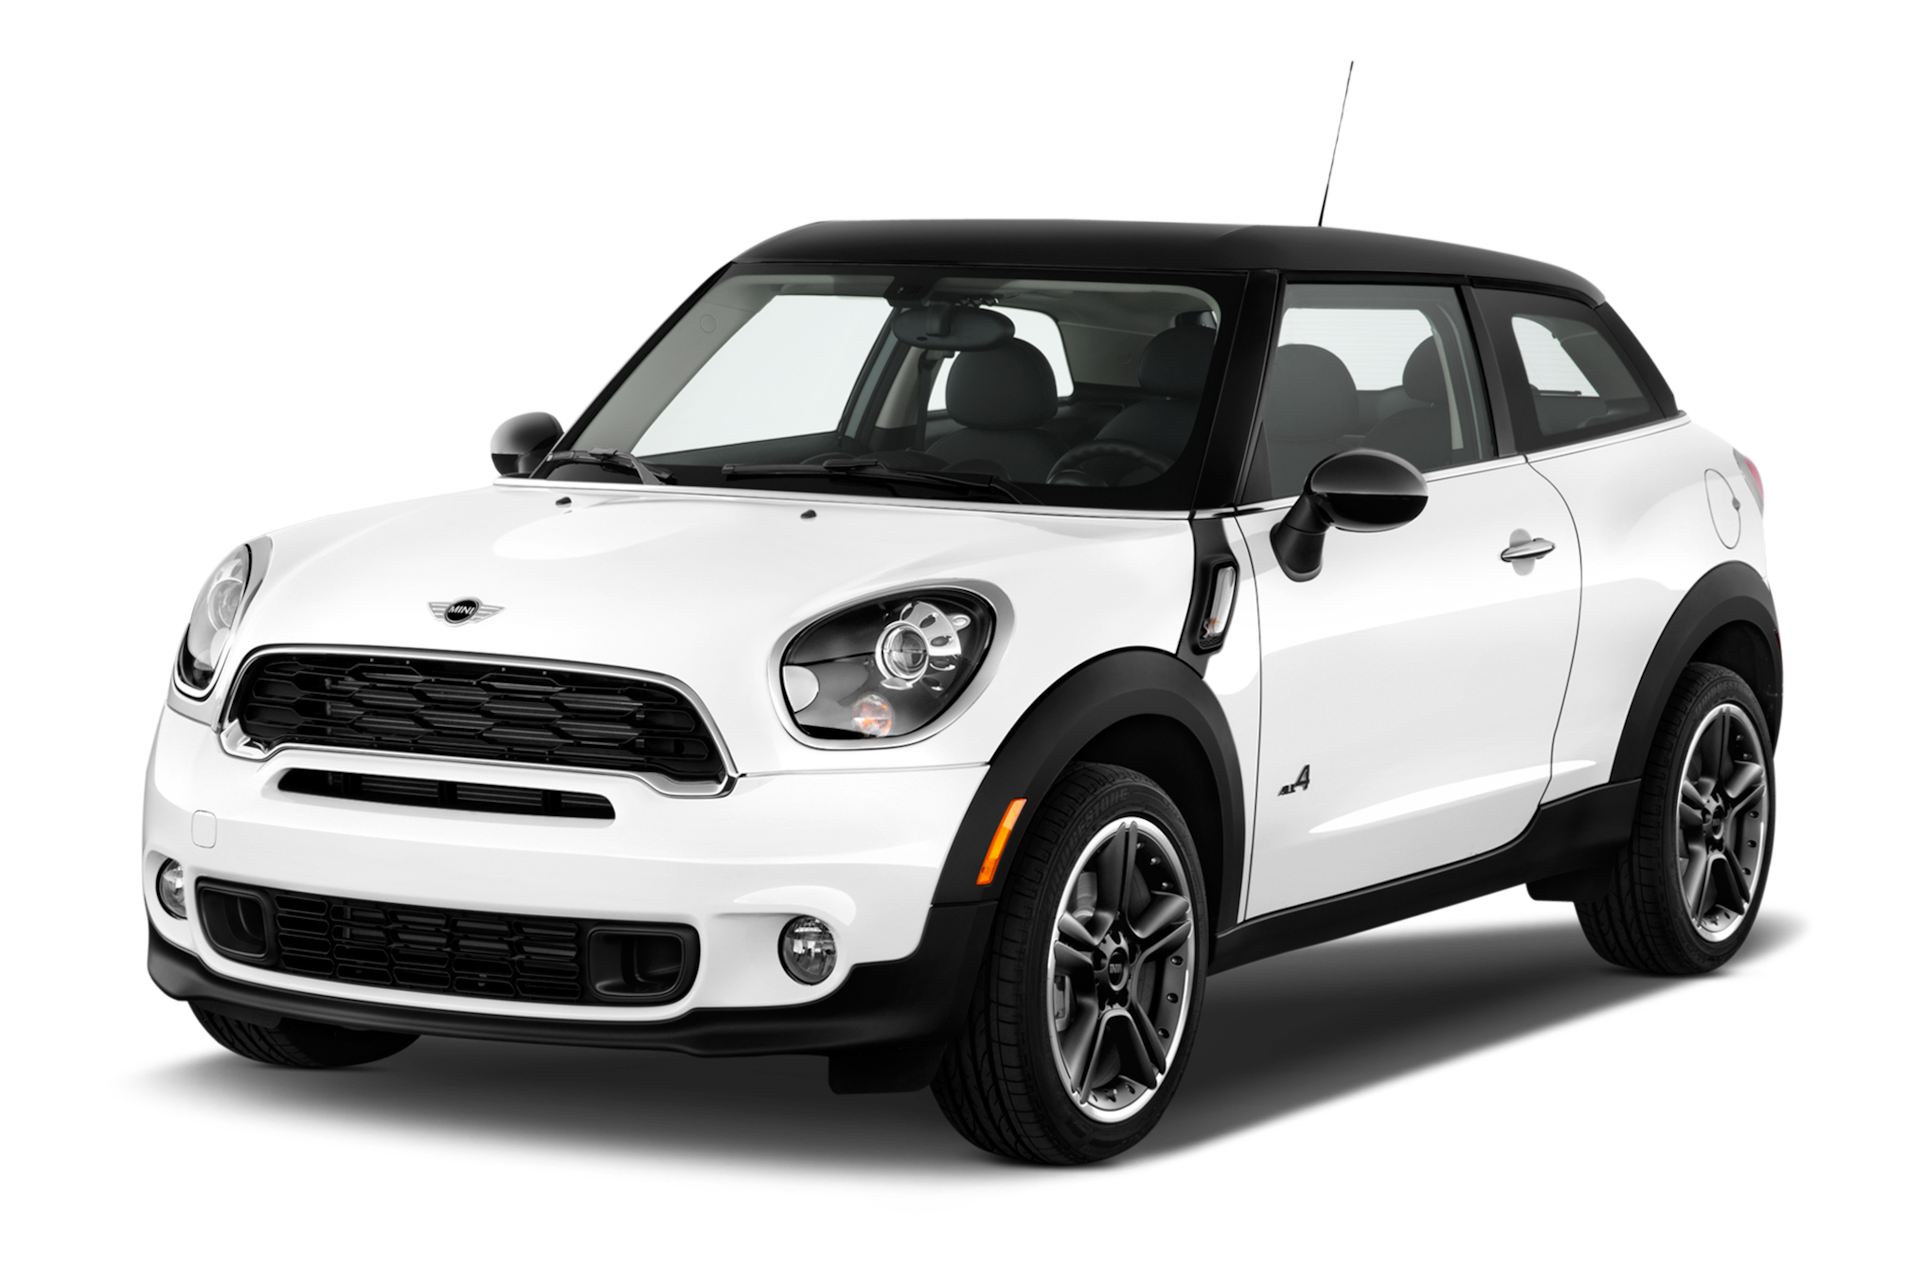 2016 MINI Cooper Paceman Prices, Reviews, and Photos - MotorTrend